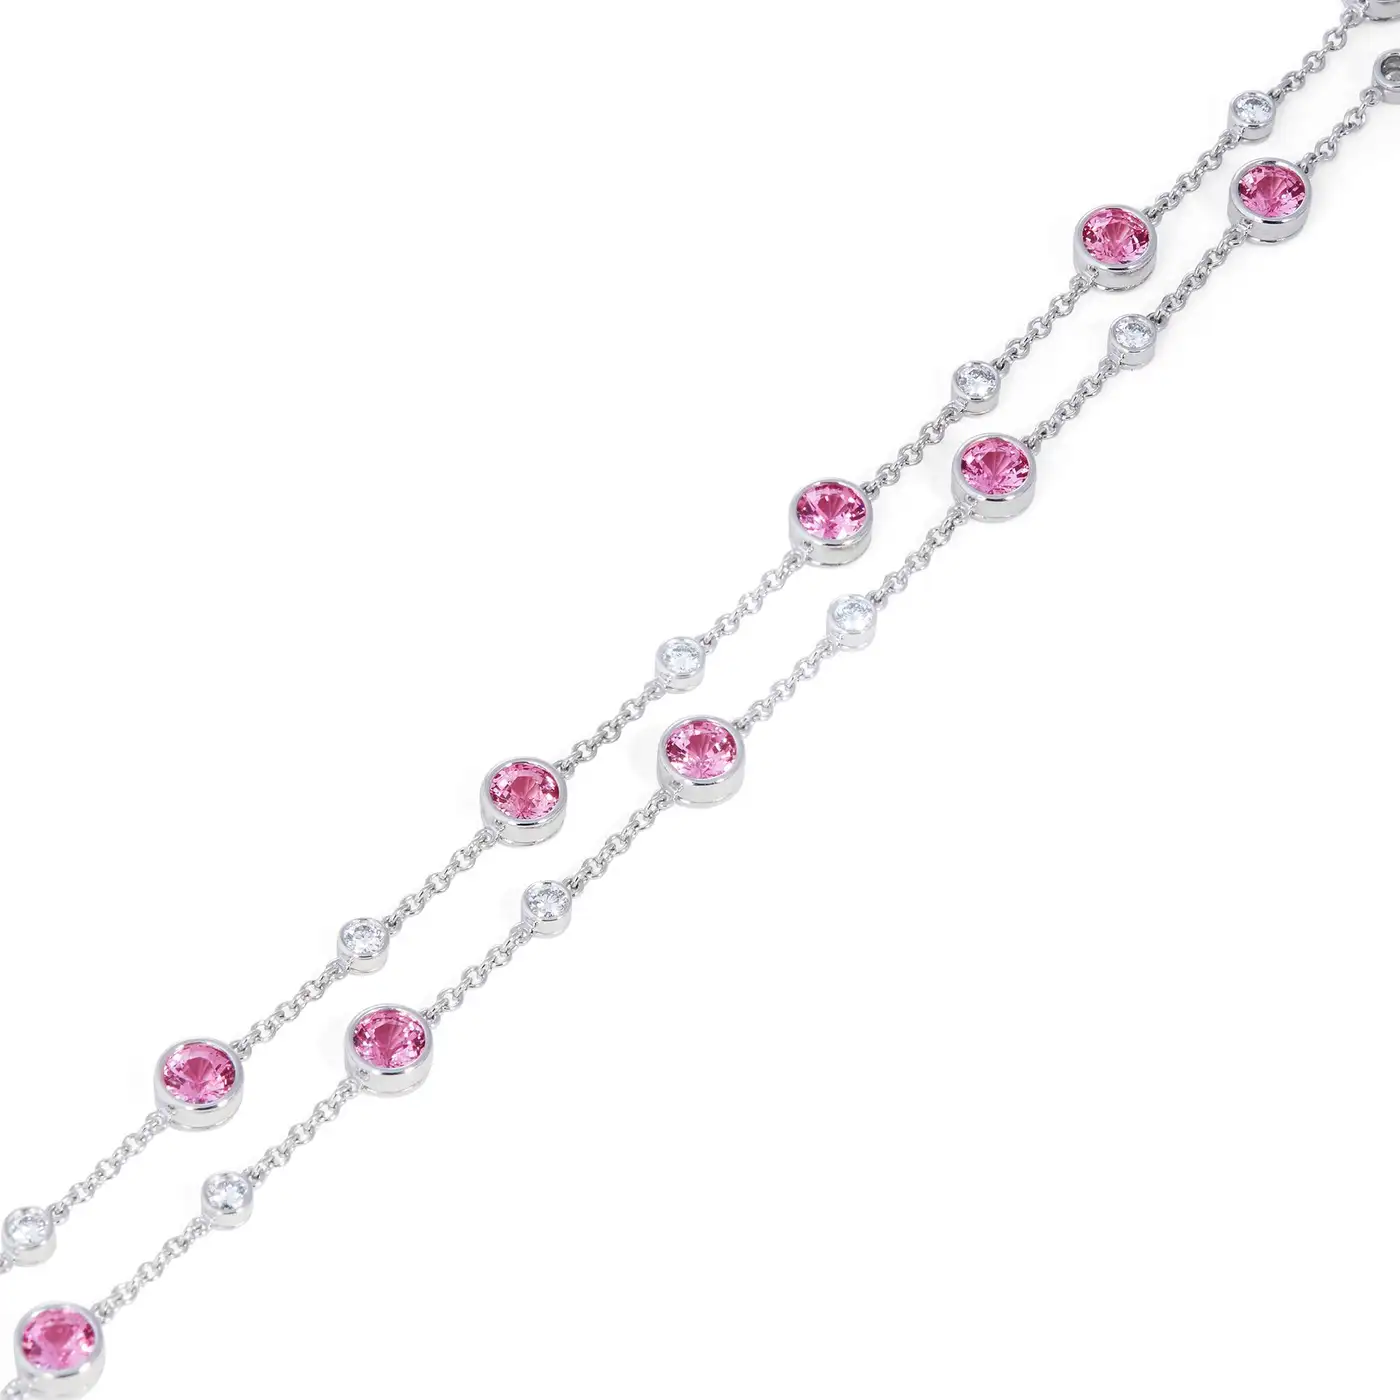 Tiffany-Swing-Pink-sapphire-and-Diamond-Necklace-Tiffany-Co-3.webp